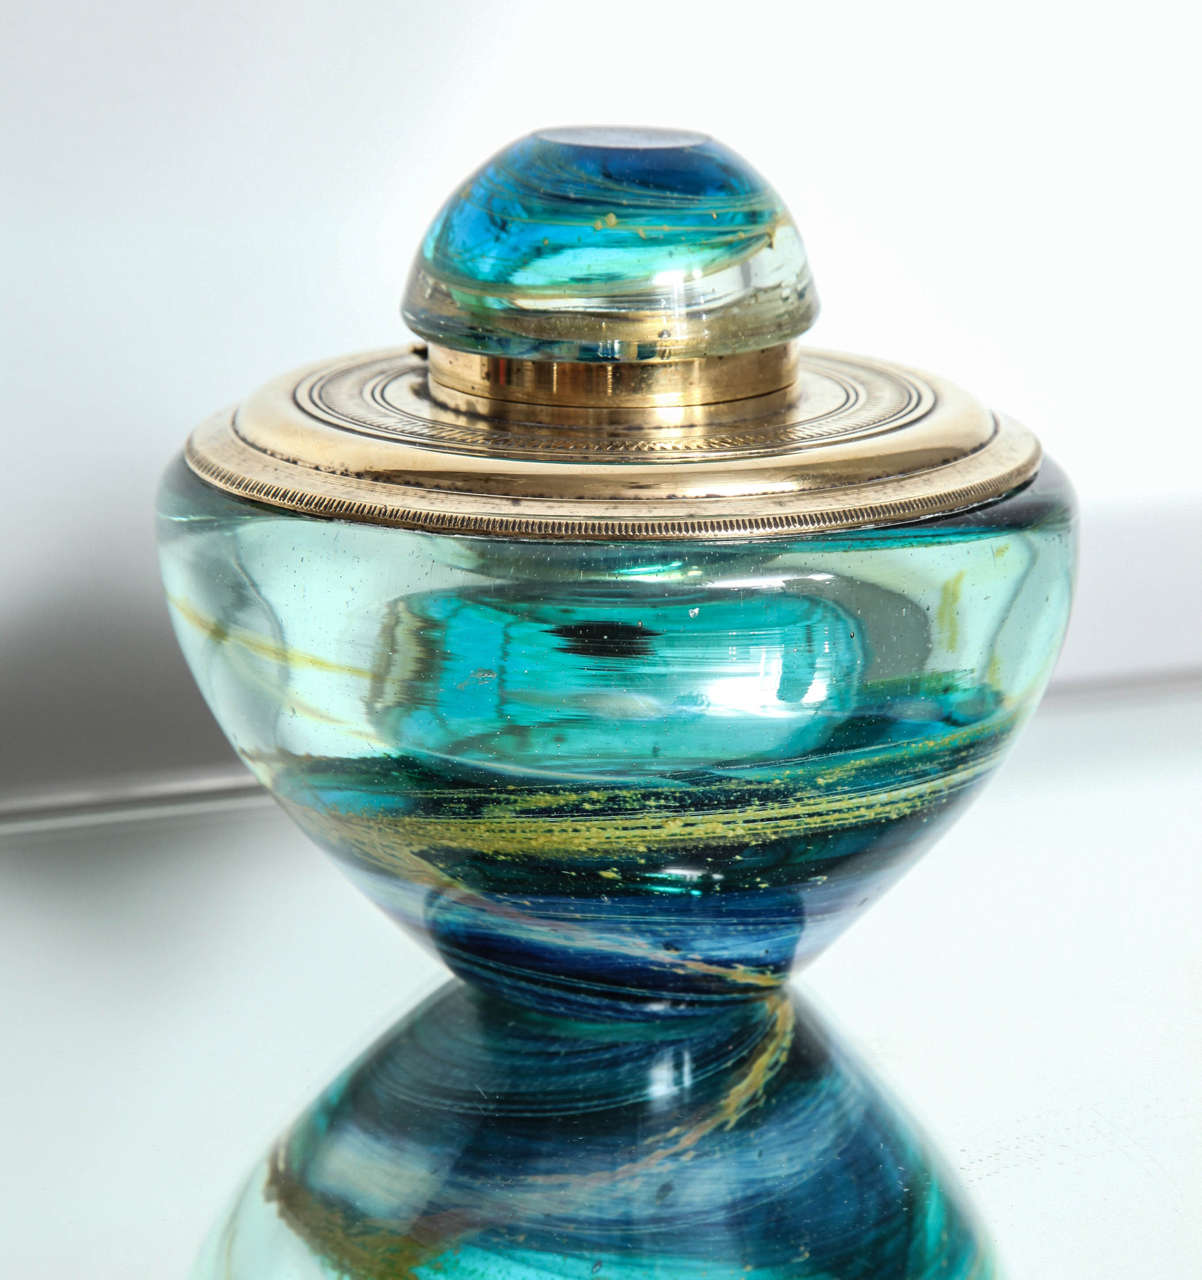 A wonderful thick Murano glass inkwell with blue swirl decoration and silver plated hinge and cap.